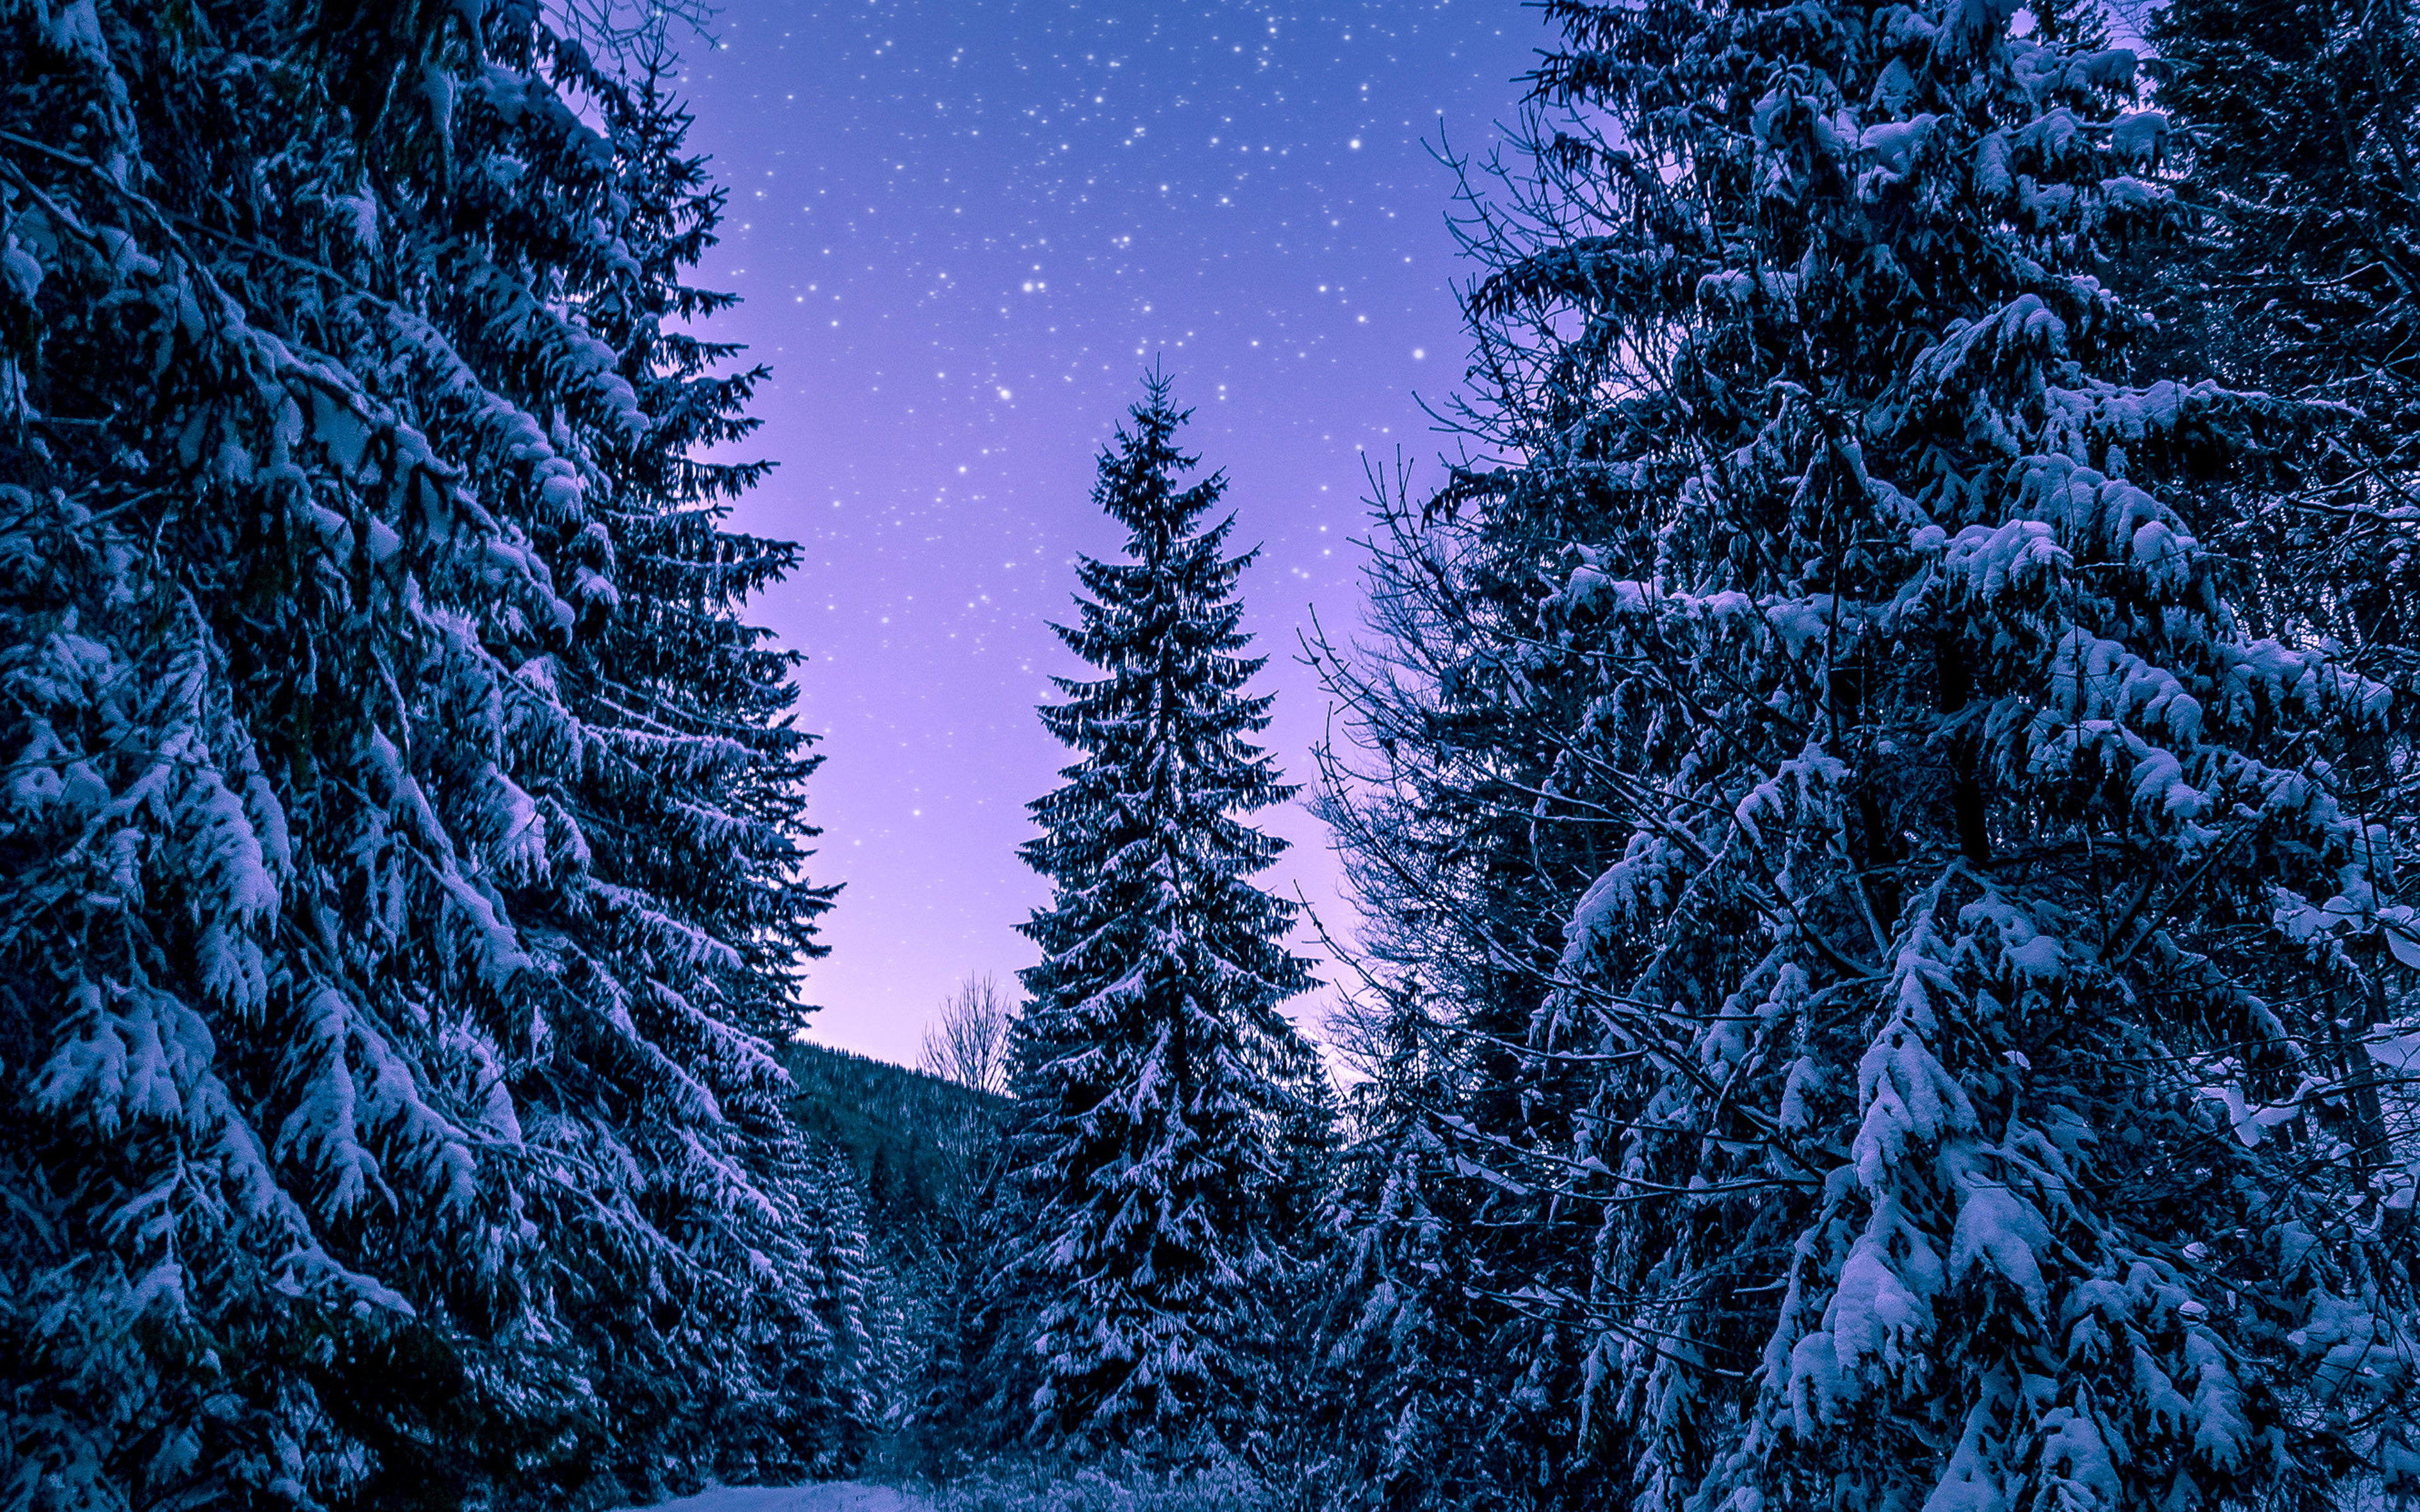 4K Winter wallpapers for iPhone, iPad